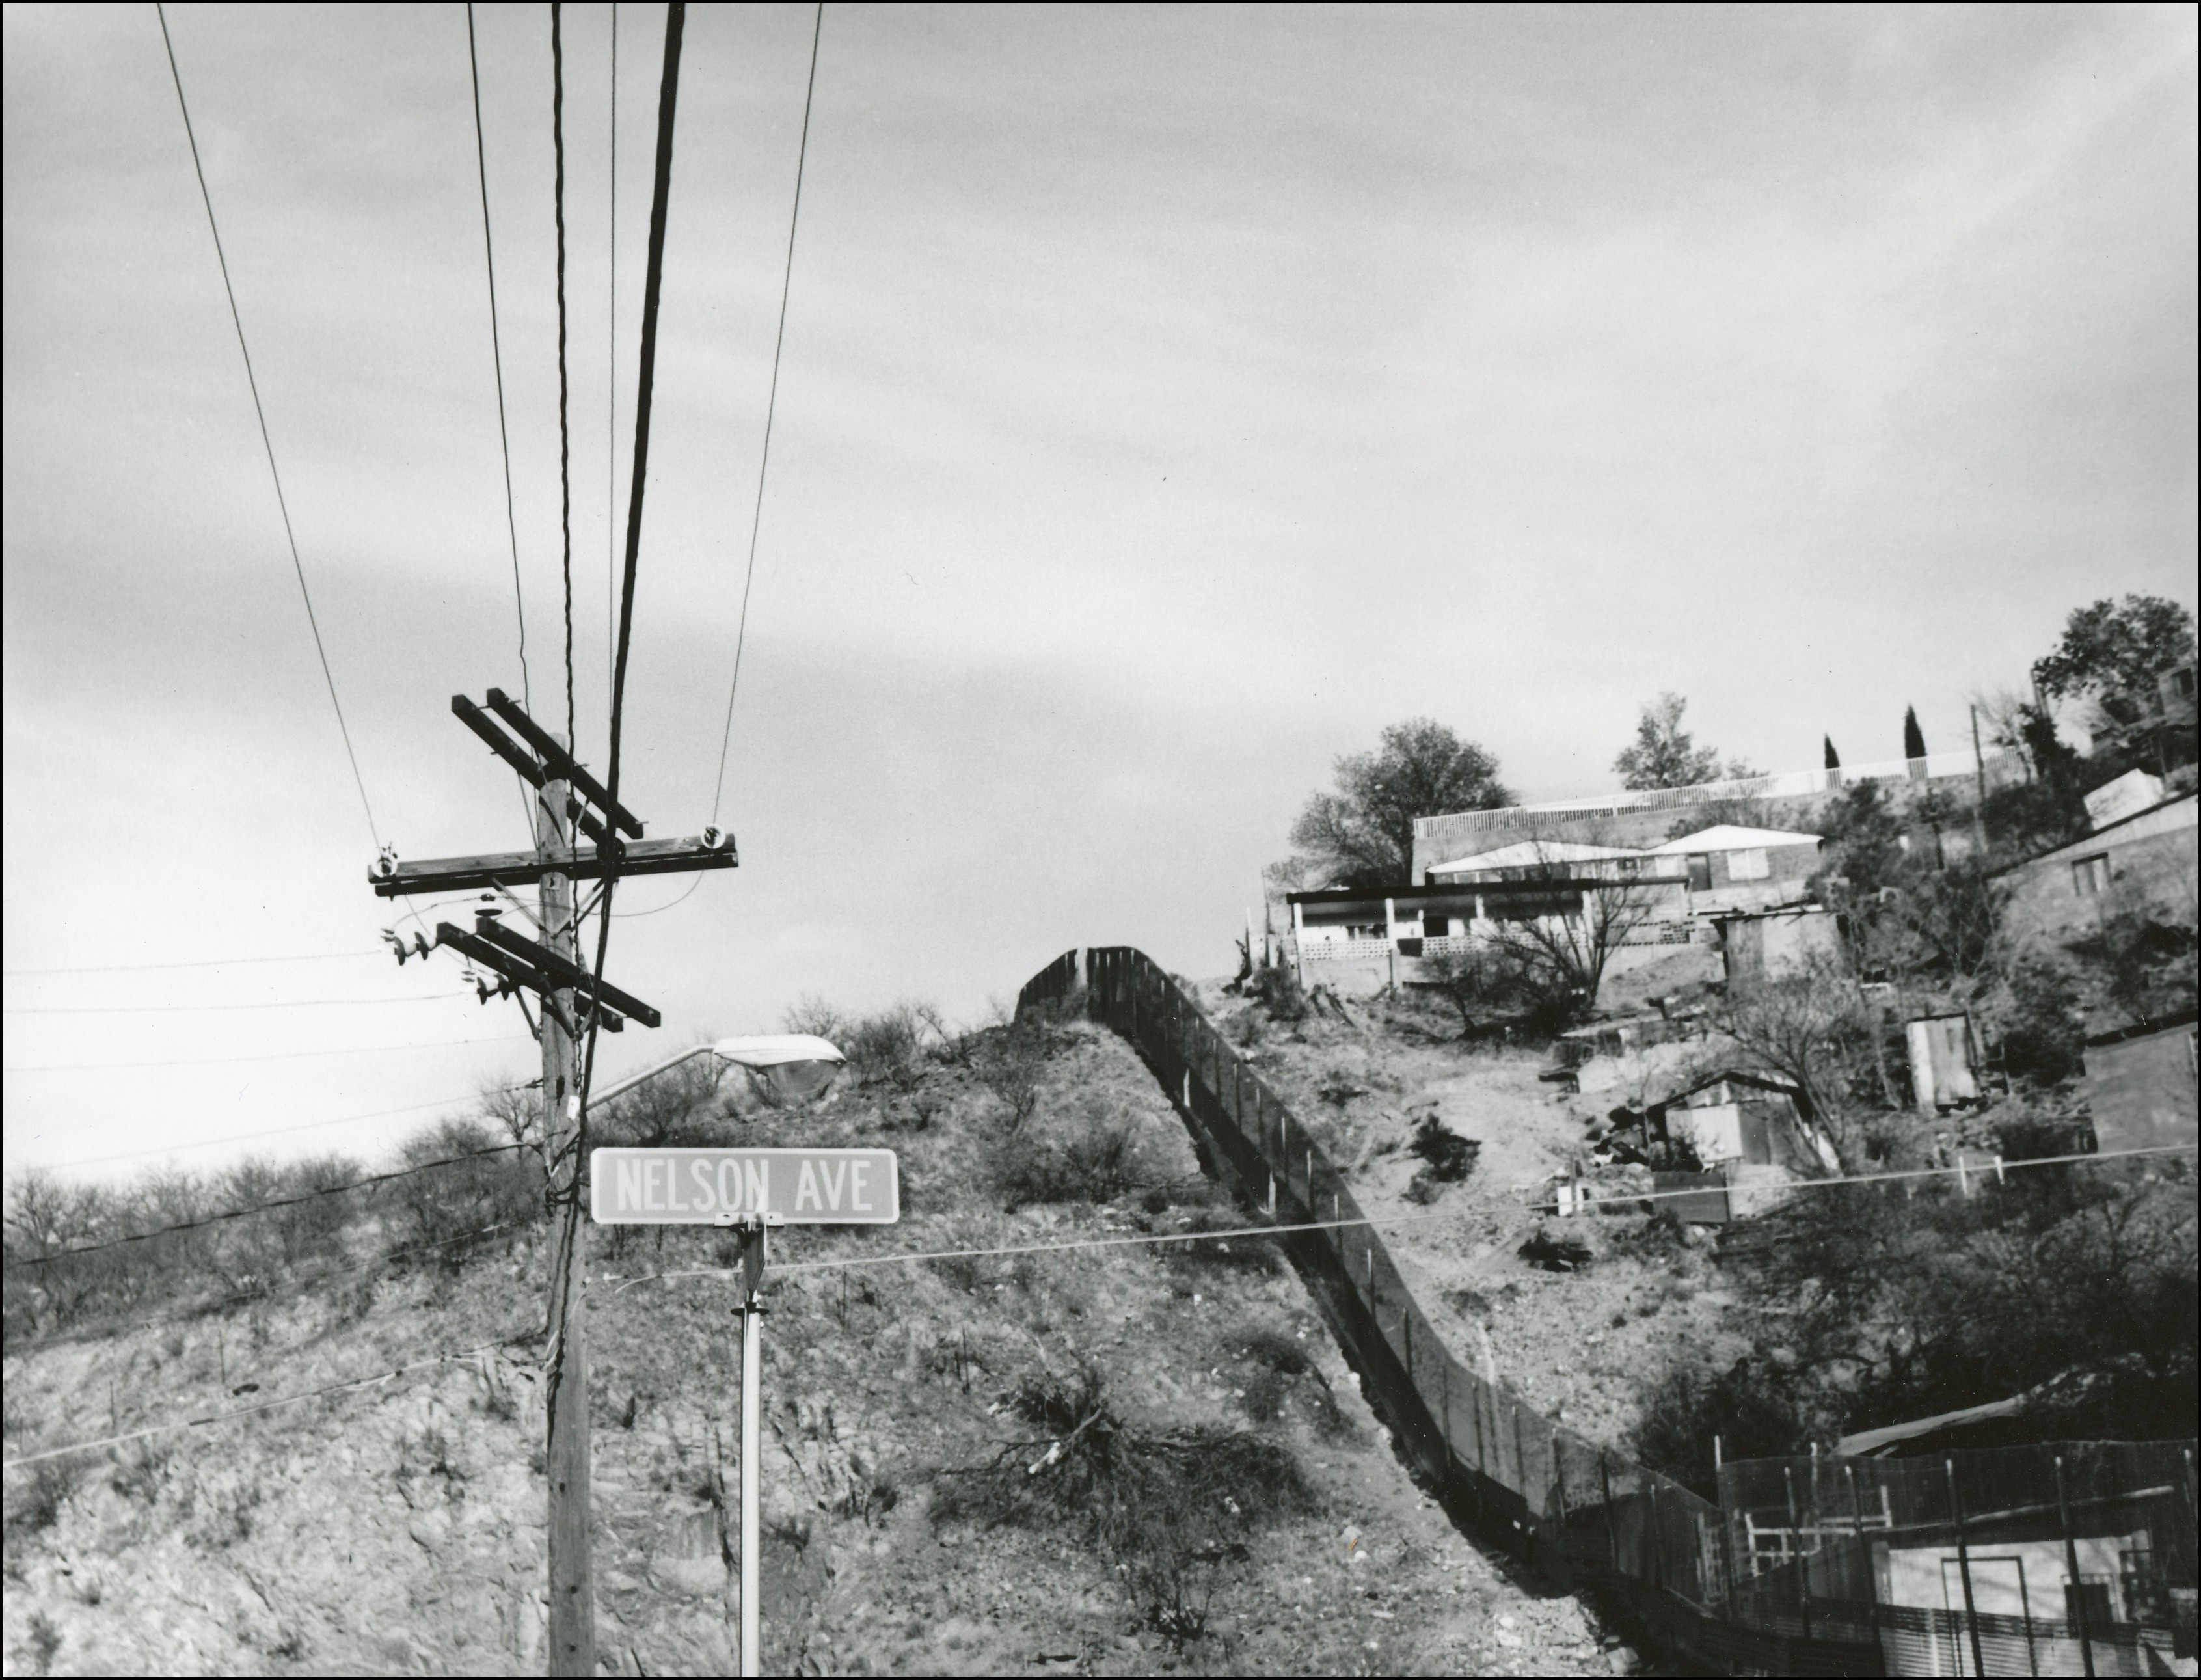 View of a border fence along a hills. Houses on right side and vegetation on left side. Also view of power lines and street sign that says Nelson Ave